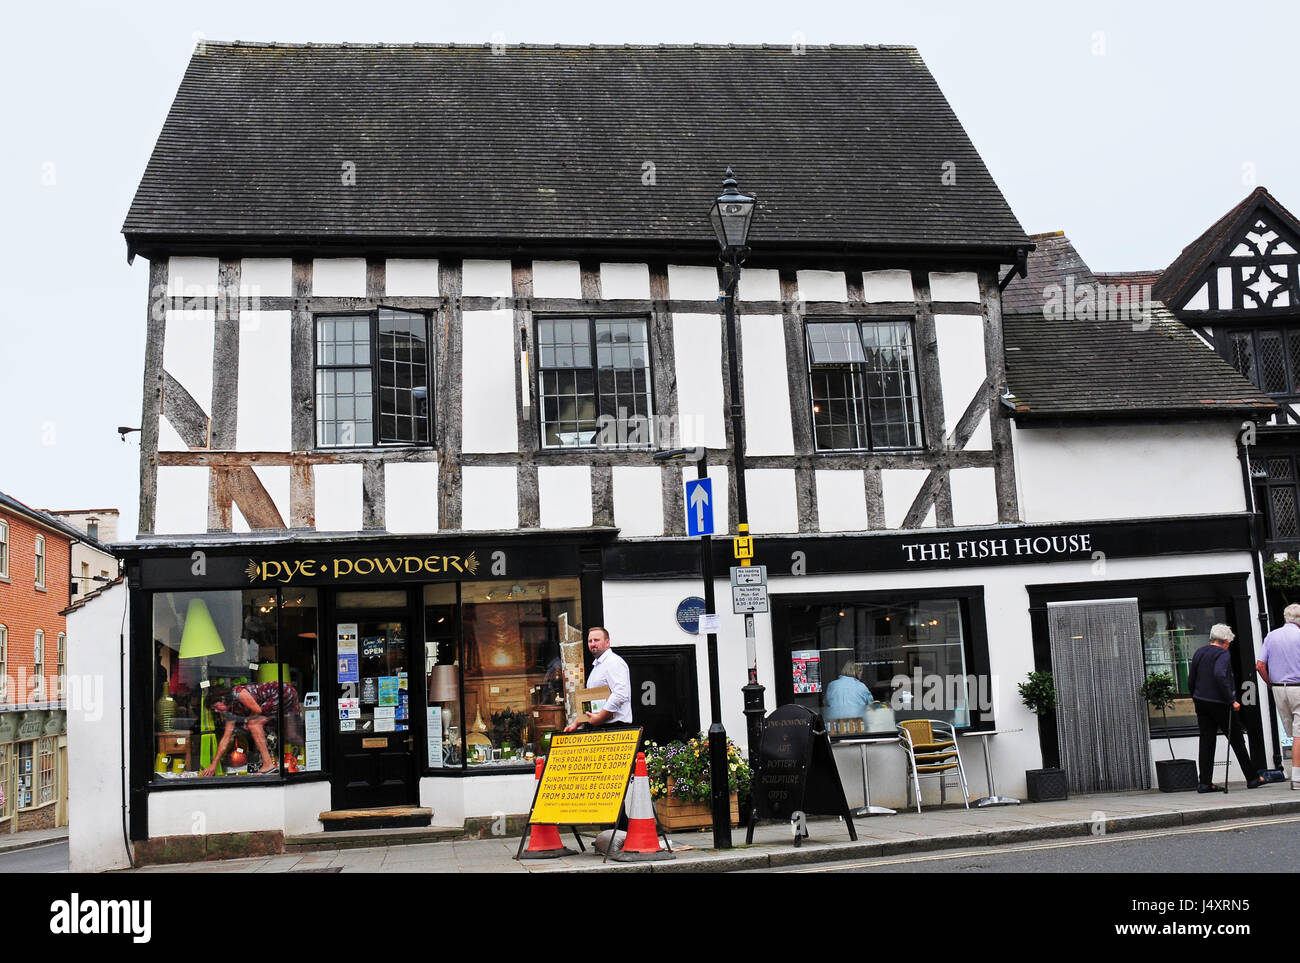 The Old Pye Powder or Pieds Poudres Court, above shops.  Ludlow. Stock Photo